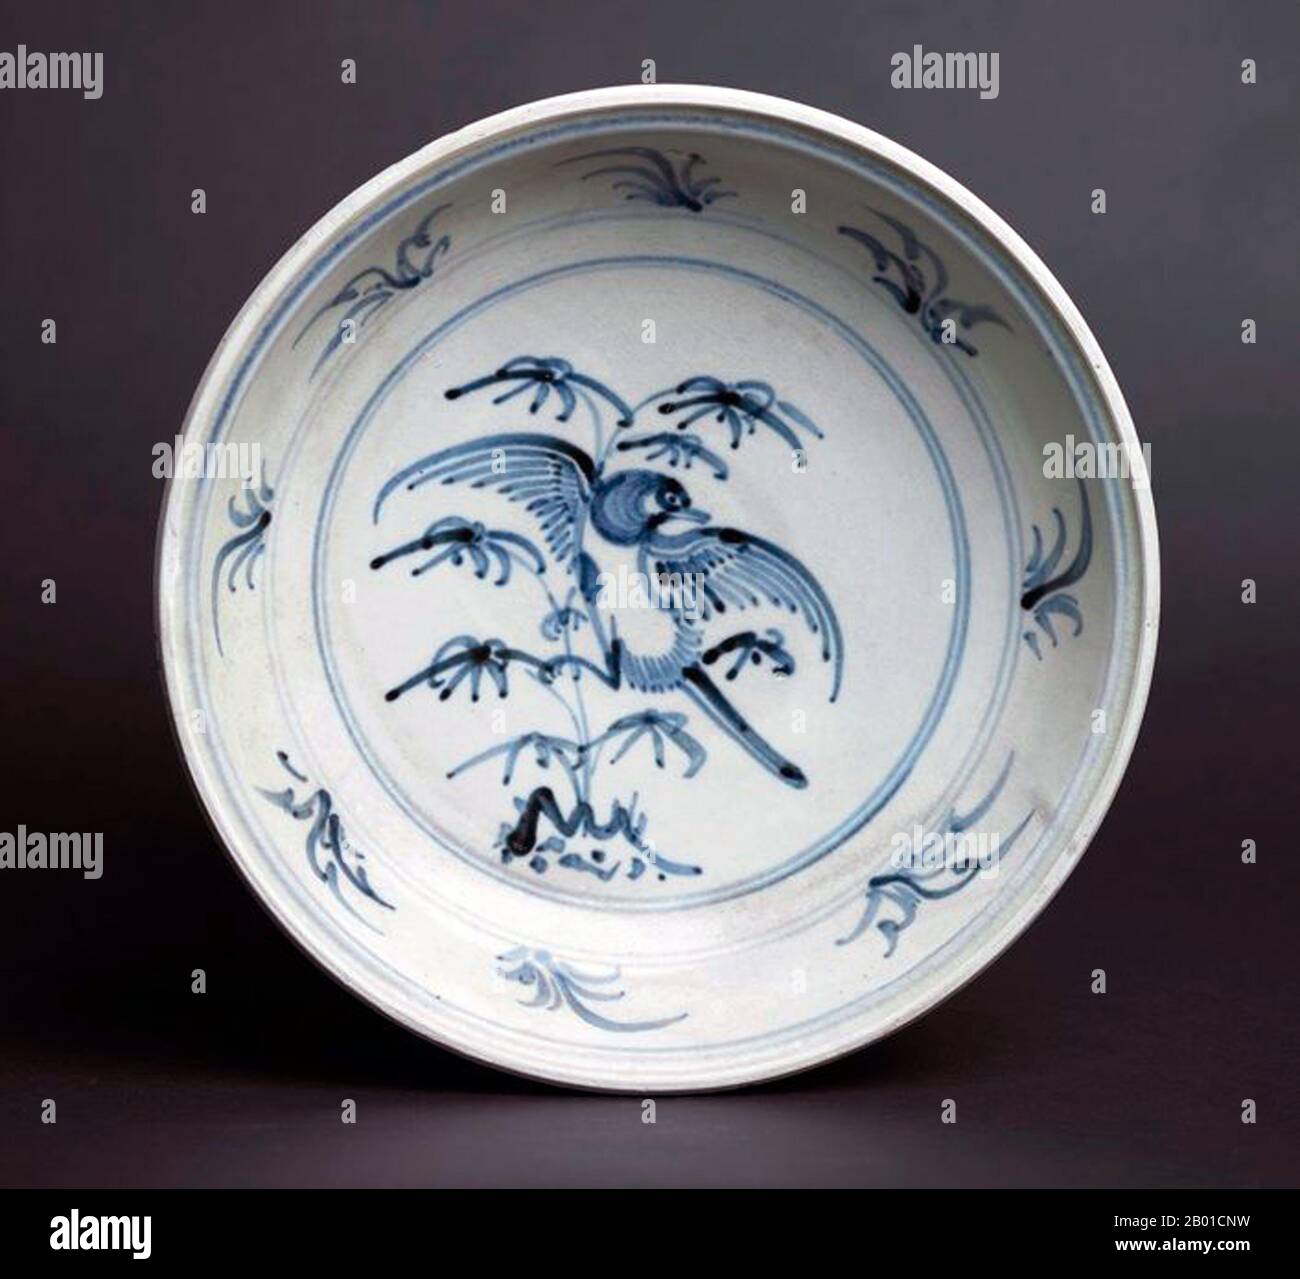 Vietnam: Blue and White Bird Plate with depiction of a single bird amid branches. Later Lê Dynasty (1533-1788).  Bát Tràng porcelain and pottery is a type of ceramics made in the village of Bát Tràng, in the suburban outskirts of the northern Vietnamese city of Hanoi. The village is located in an area rich in clay suitable for making fine ceramics.  Bát Tràng ceramics are considered some of the best known porcelain products in Vietnam besides those of Chu Đậu, Đồng Nai, Phu Lang, and Ninh Thuận. Stock Photo